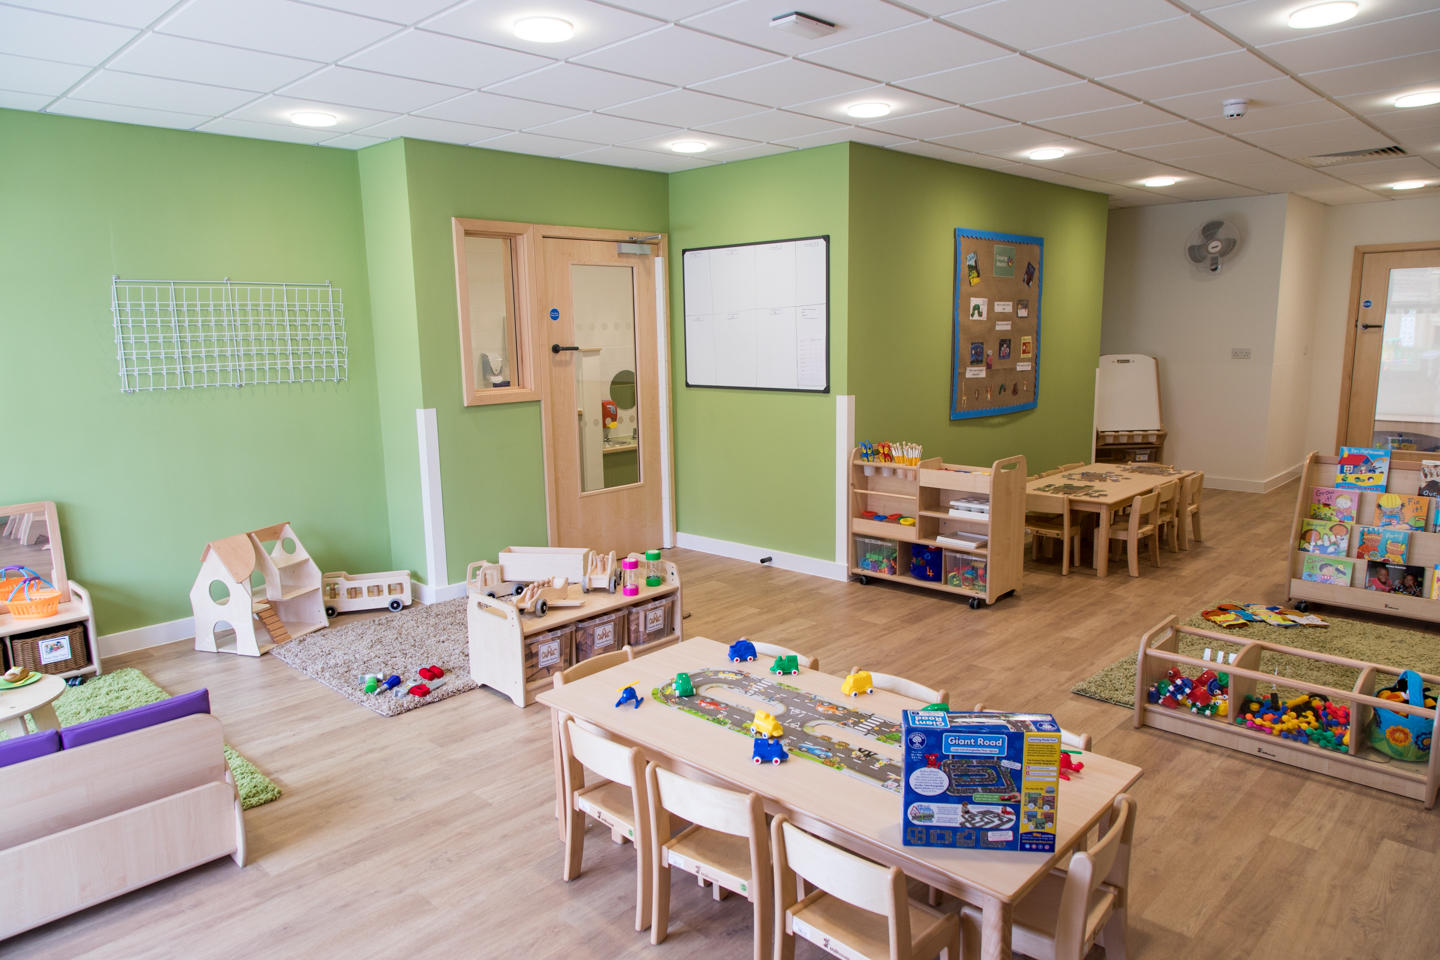 Images Bright Horizons Didcot Day Nursery and Preschool